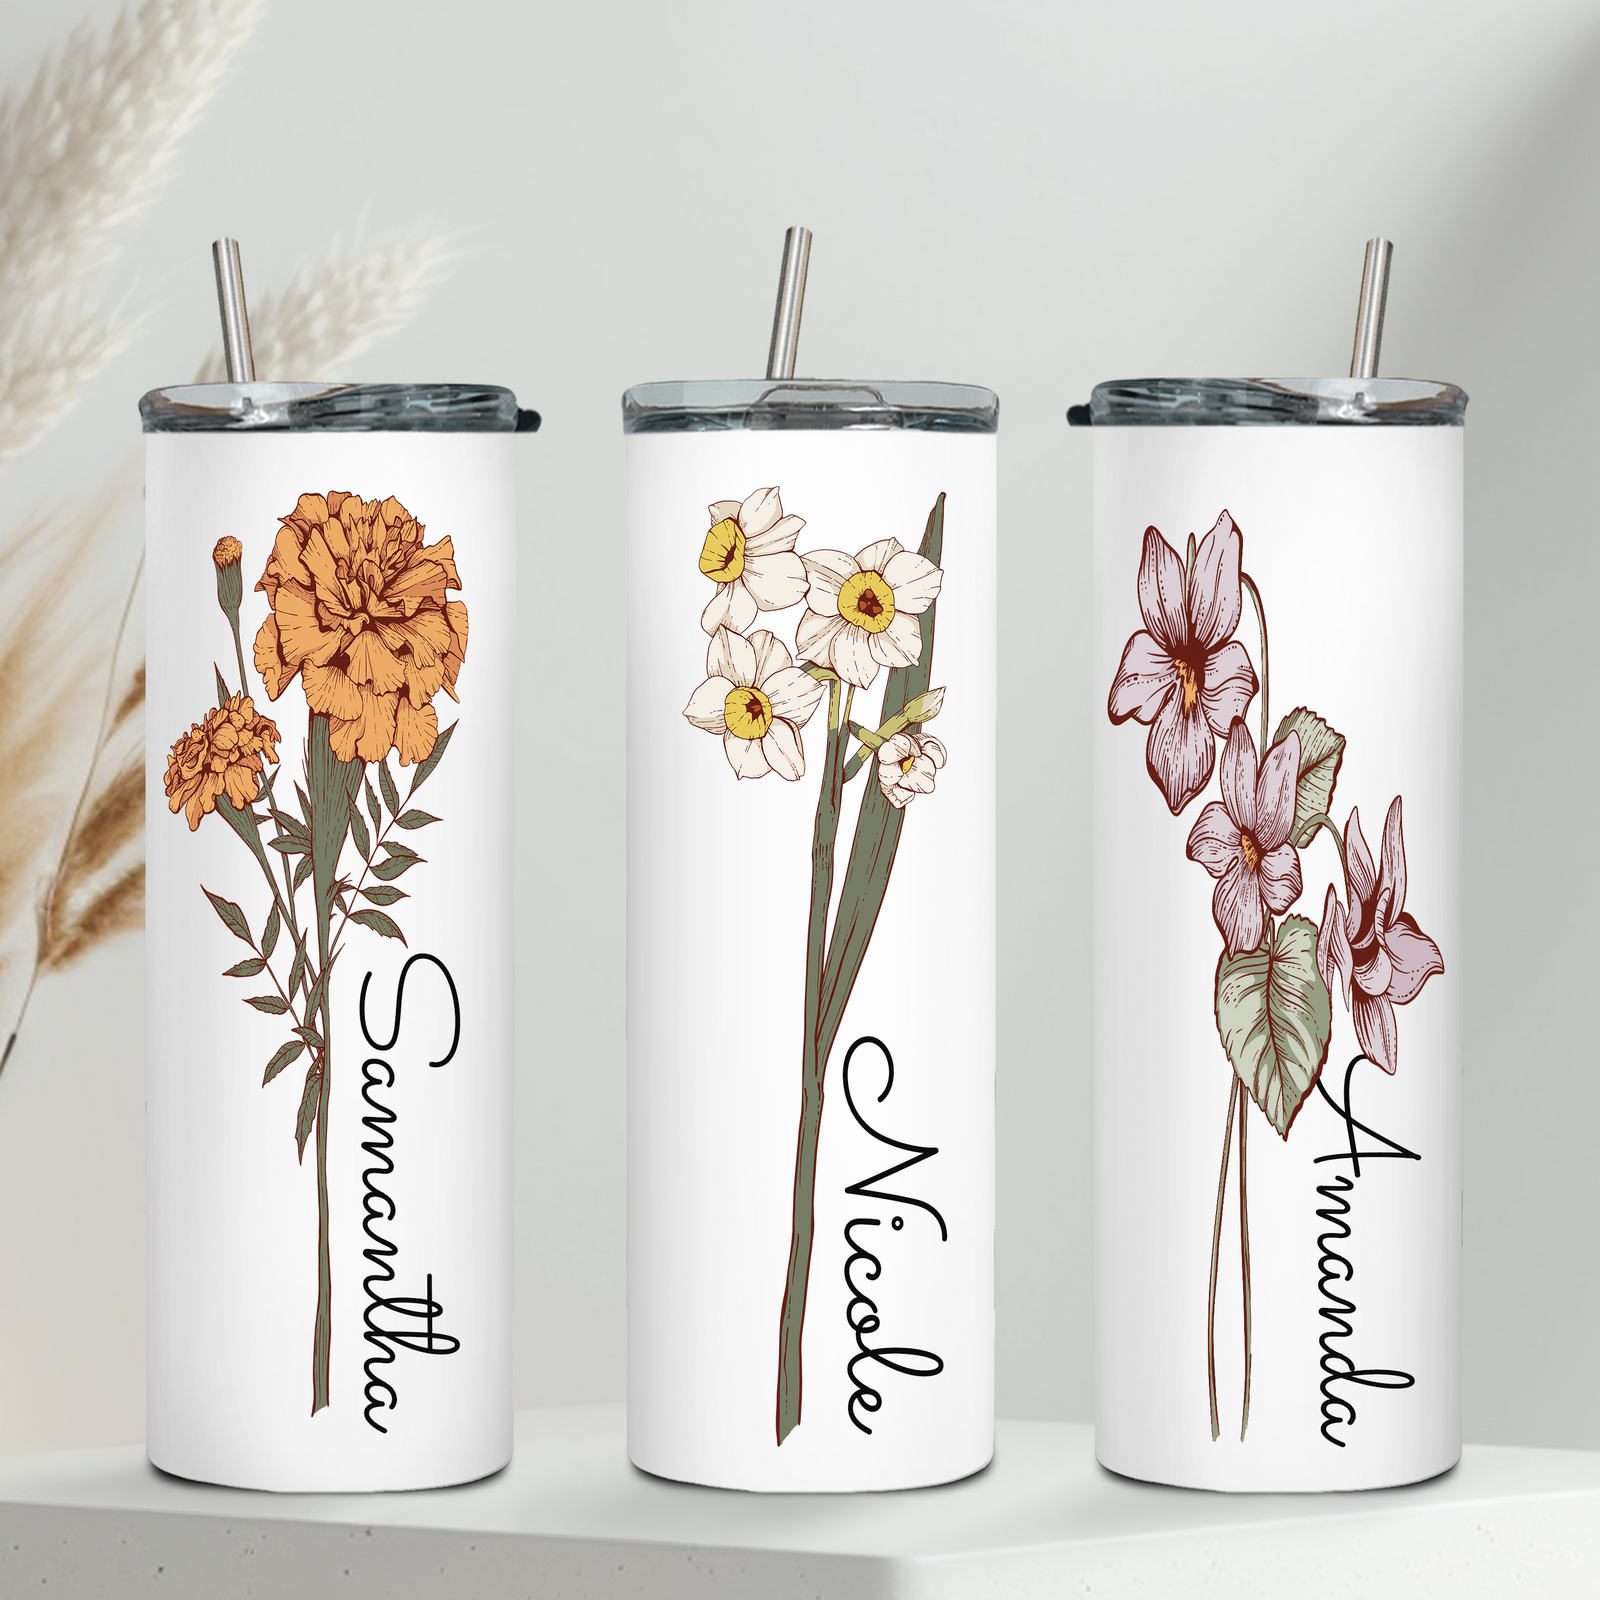 17 BEST Bridesmaid Tumblers in 2022 (Free Shipping Today) - Bridesmaid  Gifts Boutique